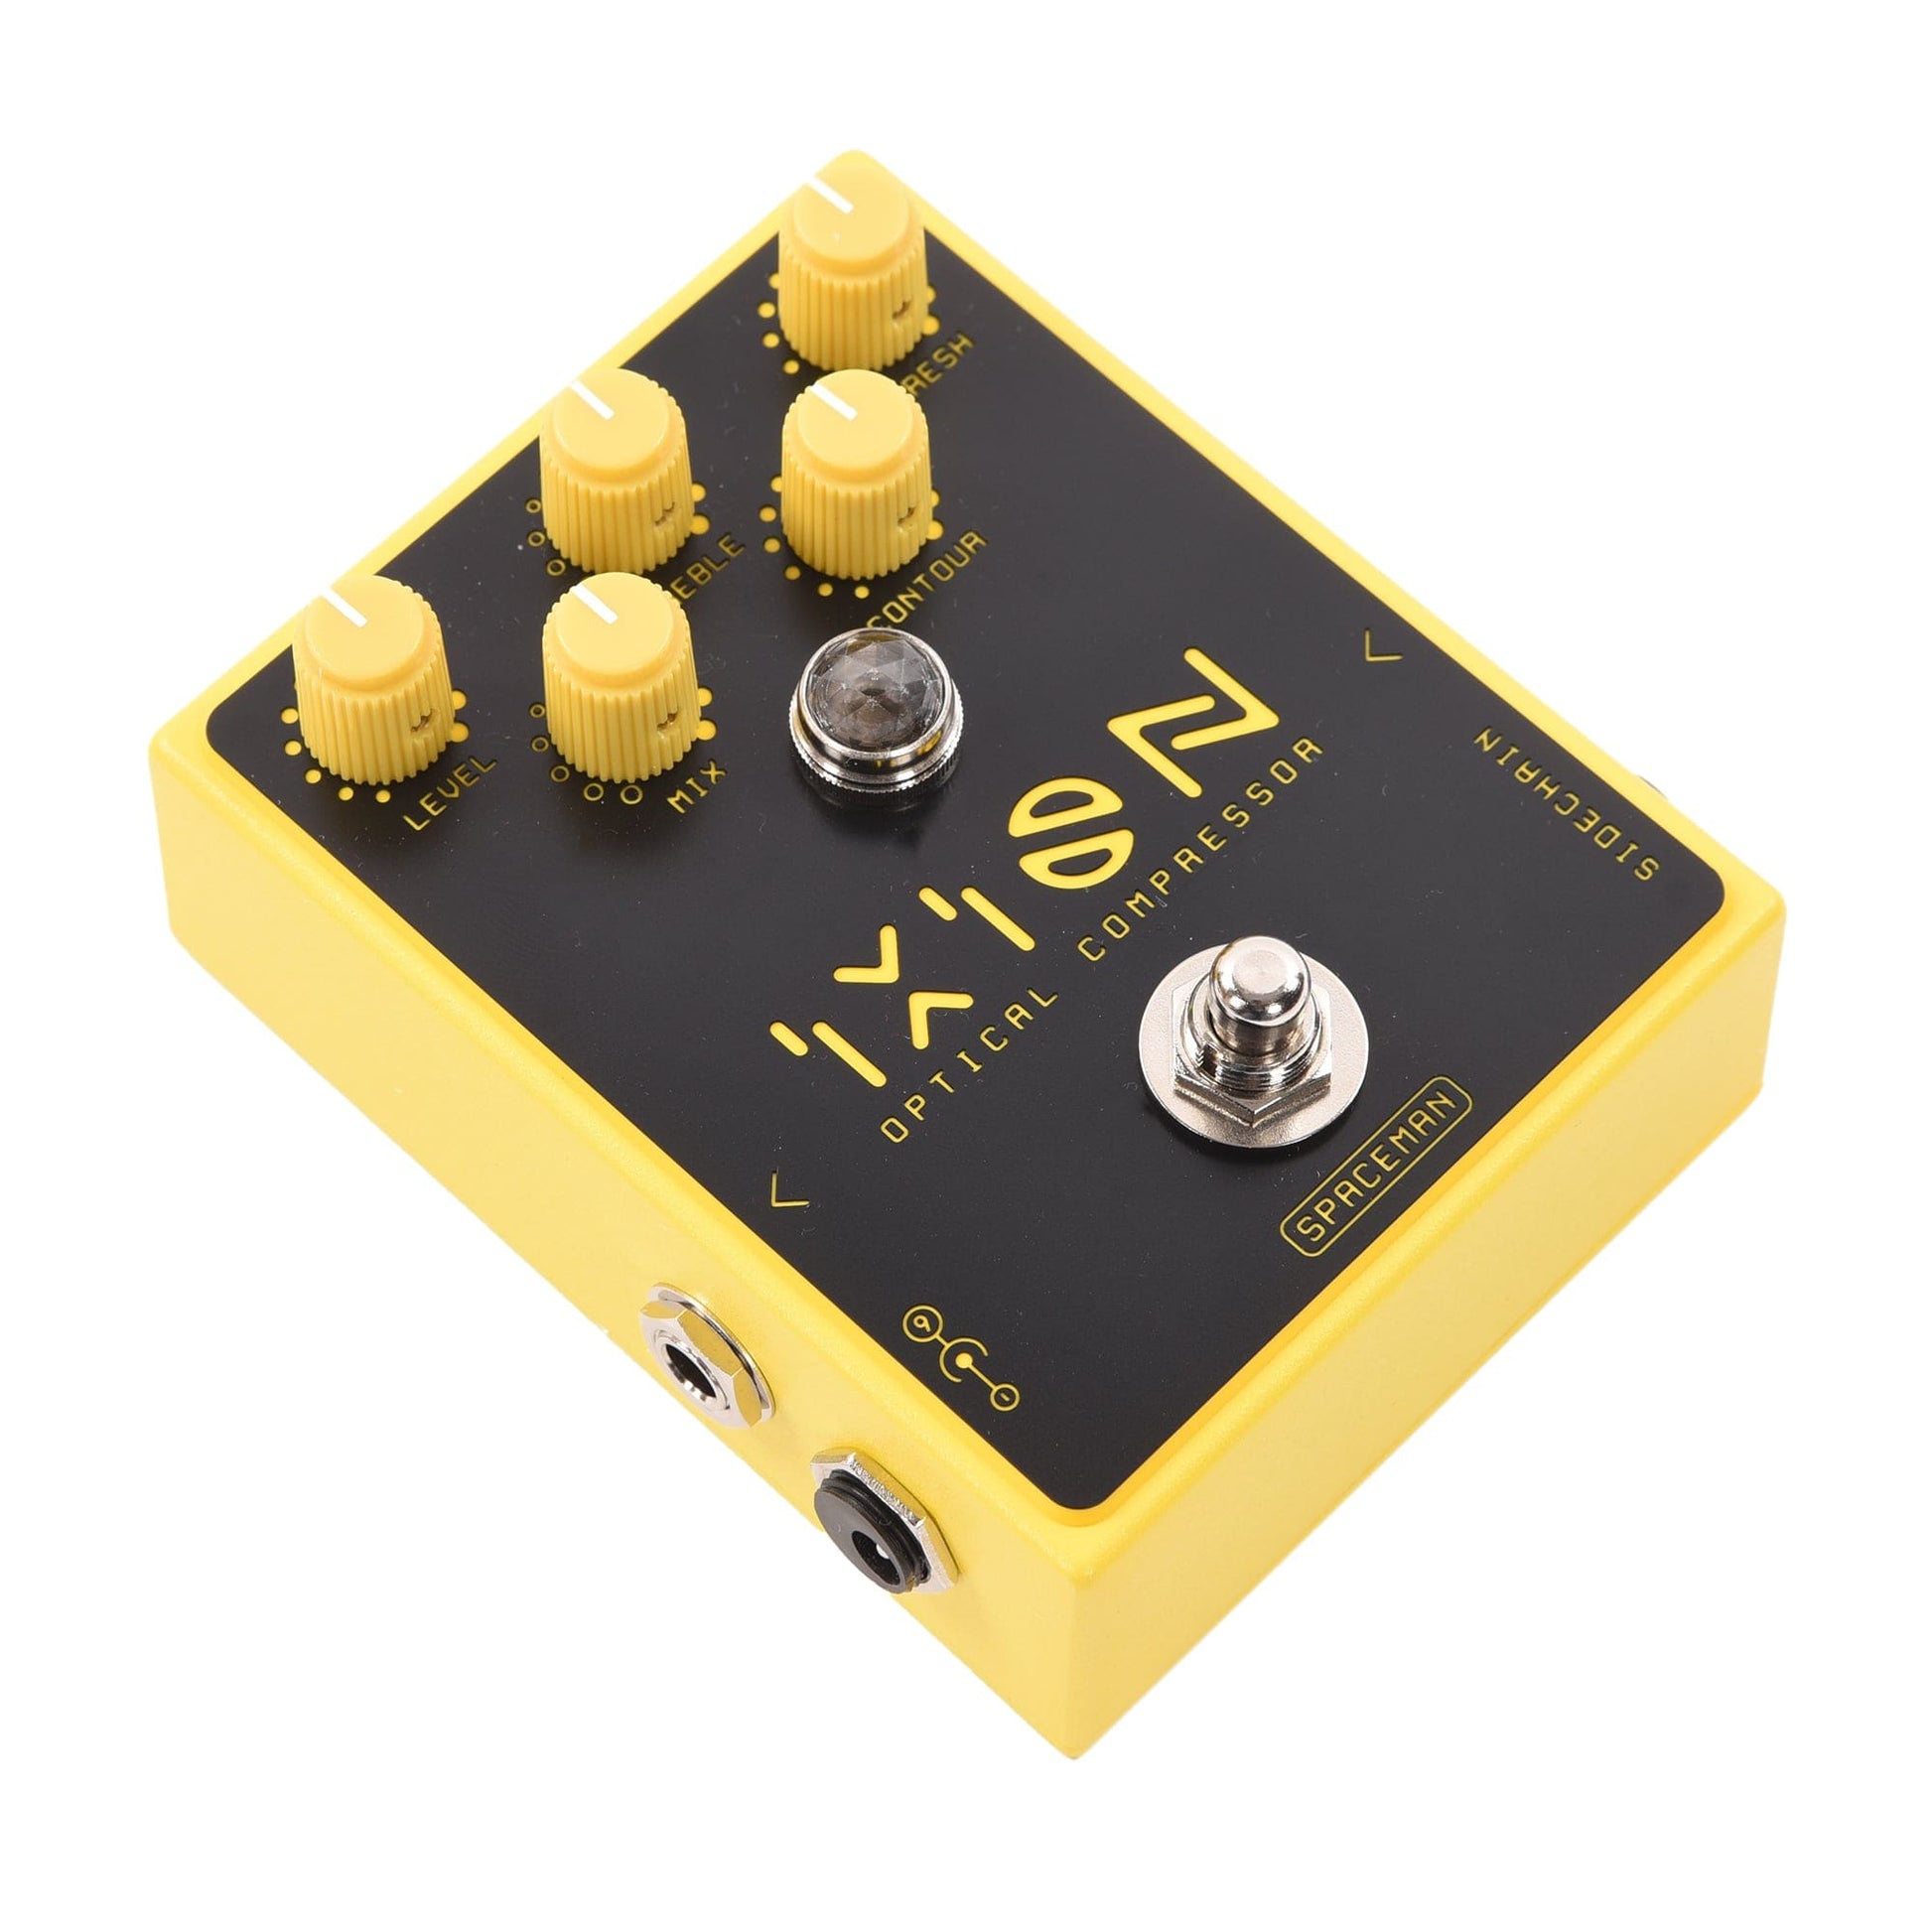 Spaceman Ixion Optical Compressor Yellow Pedal Effects and Pedals / Chorus and Vibrato